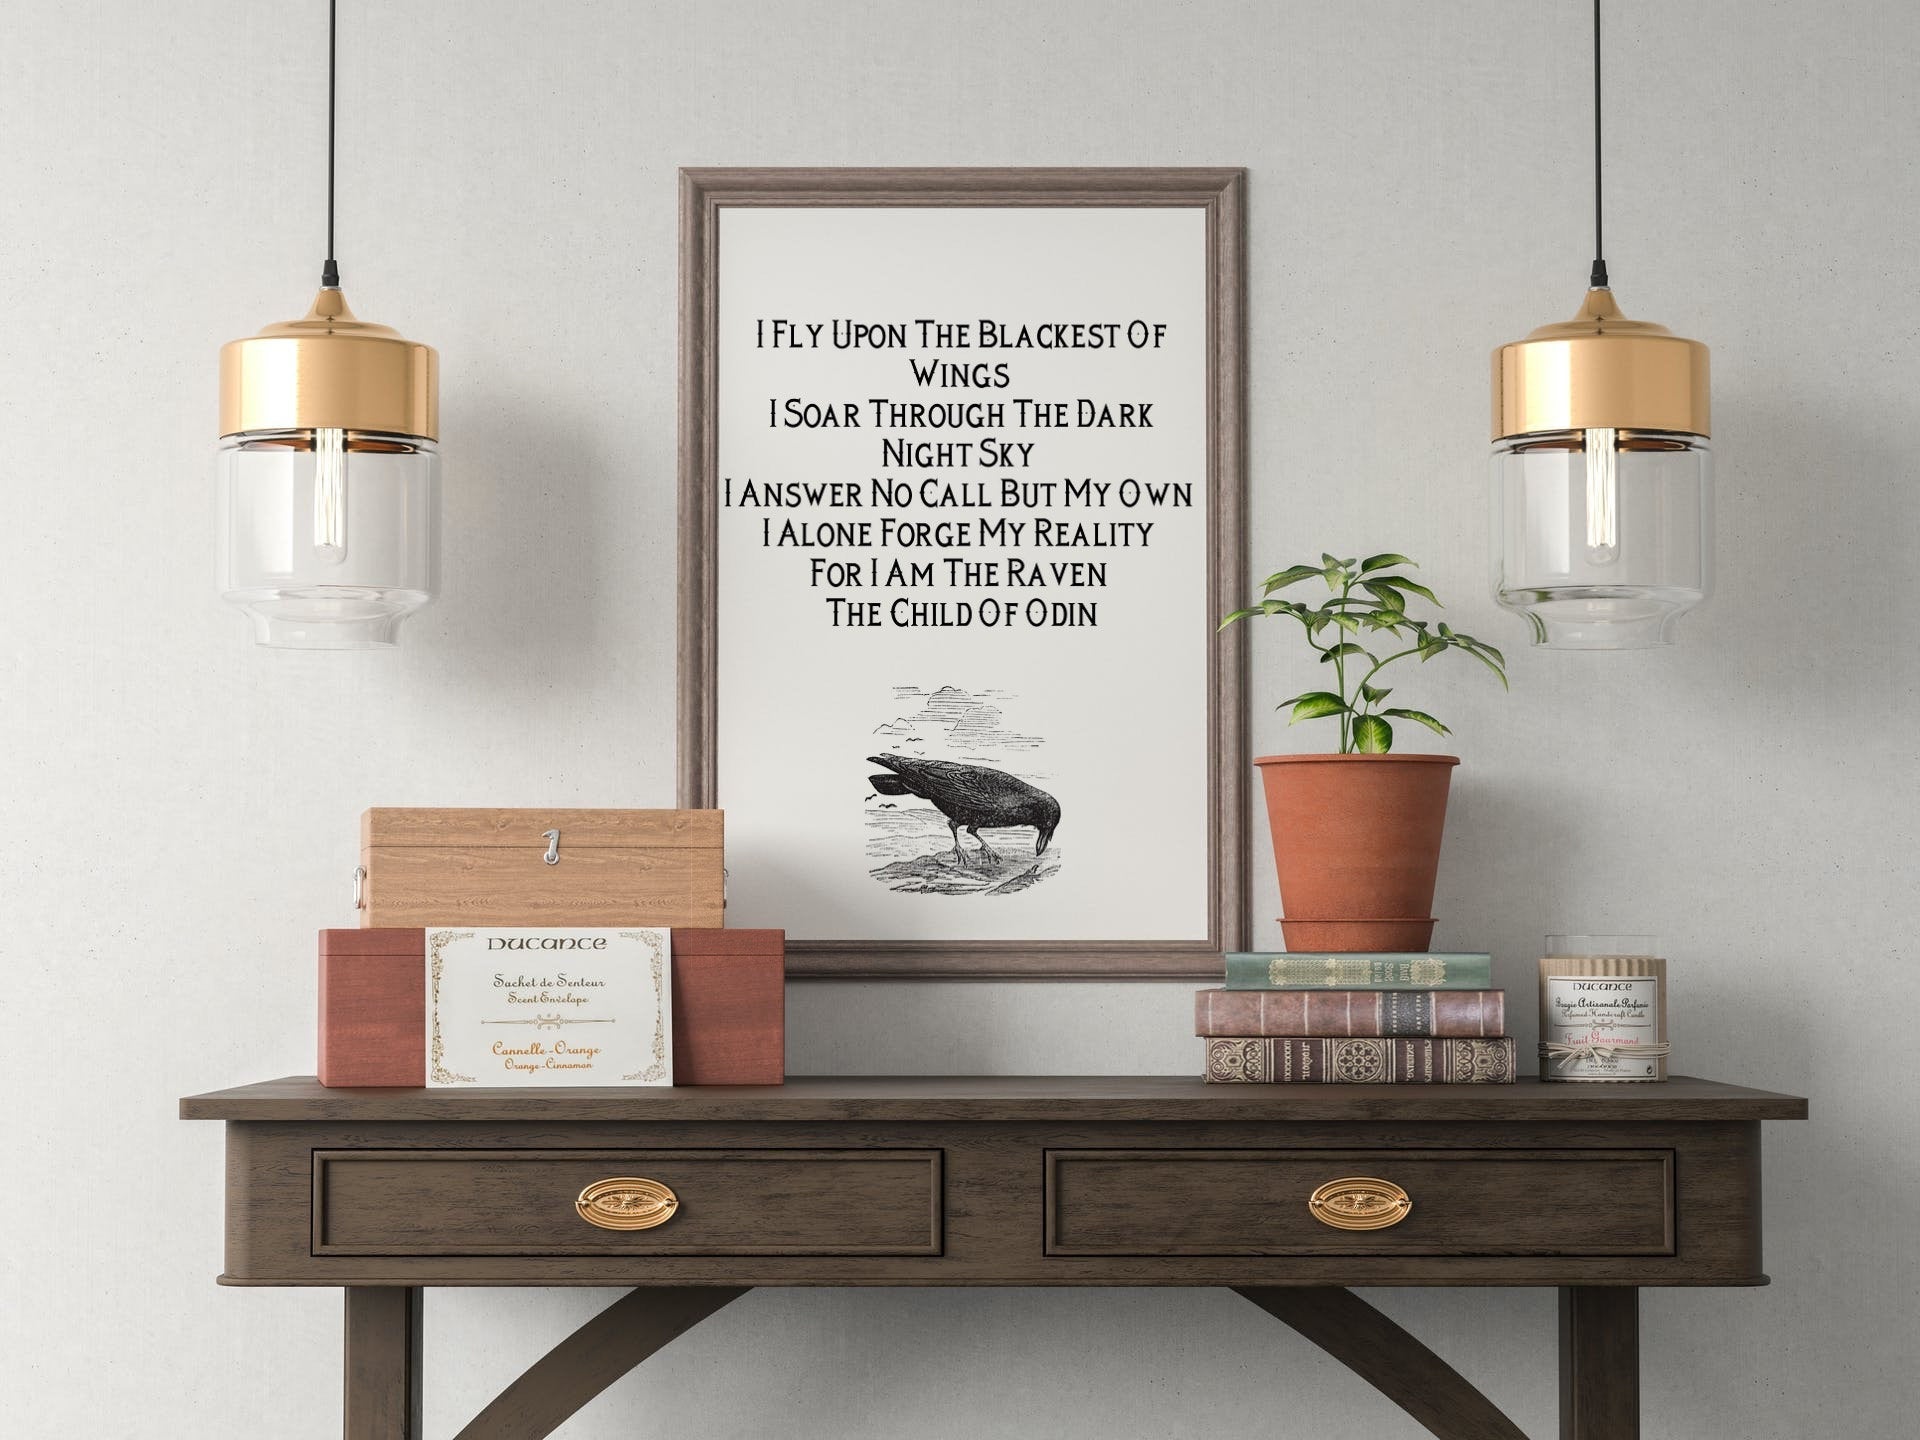 Norse Viking Poetry Child of Odin Wall Art Print, I Fly Upon The Blackest of Wings